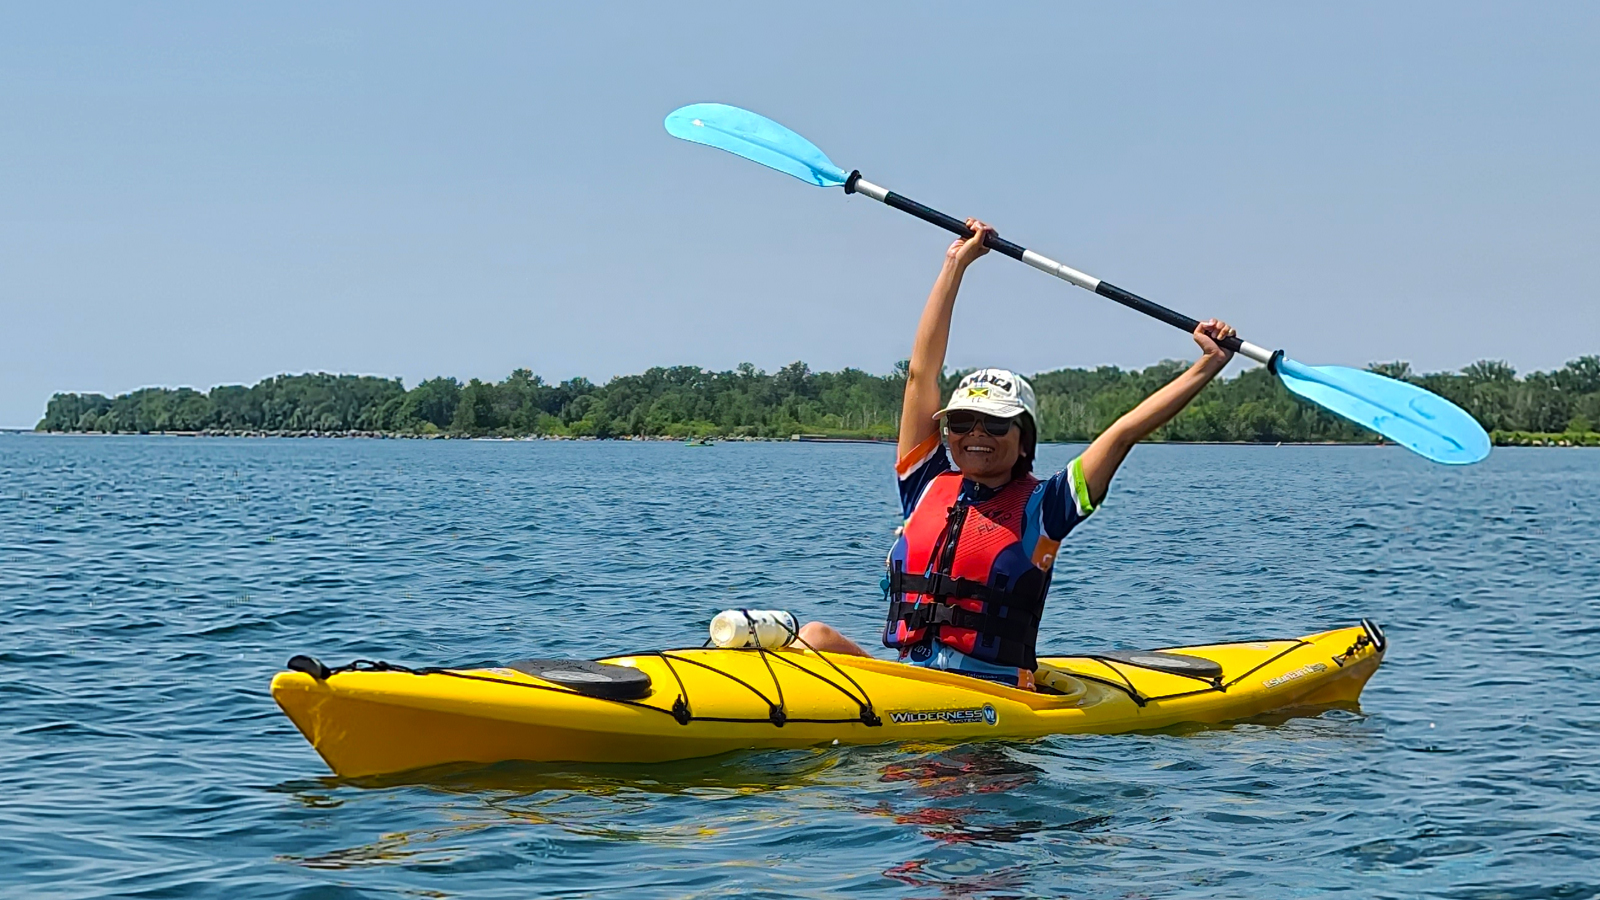 Learn to Kayak with Paddle Canada's Basic Kayak Skills Course